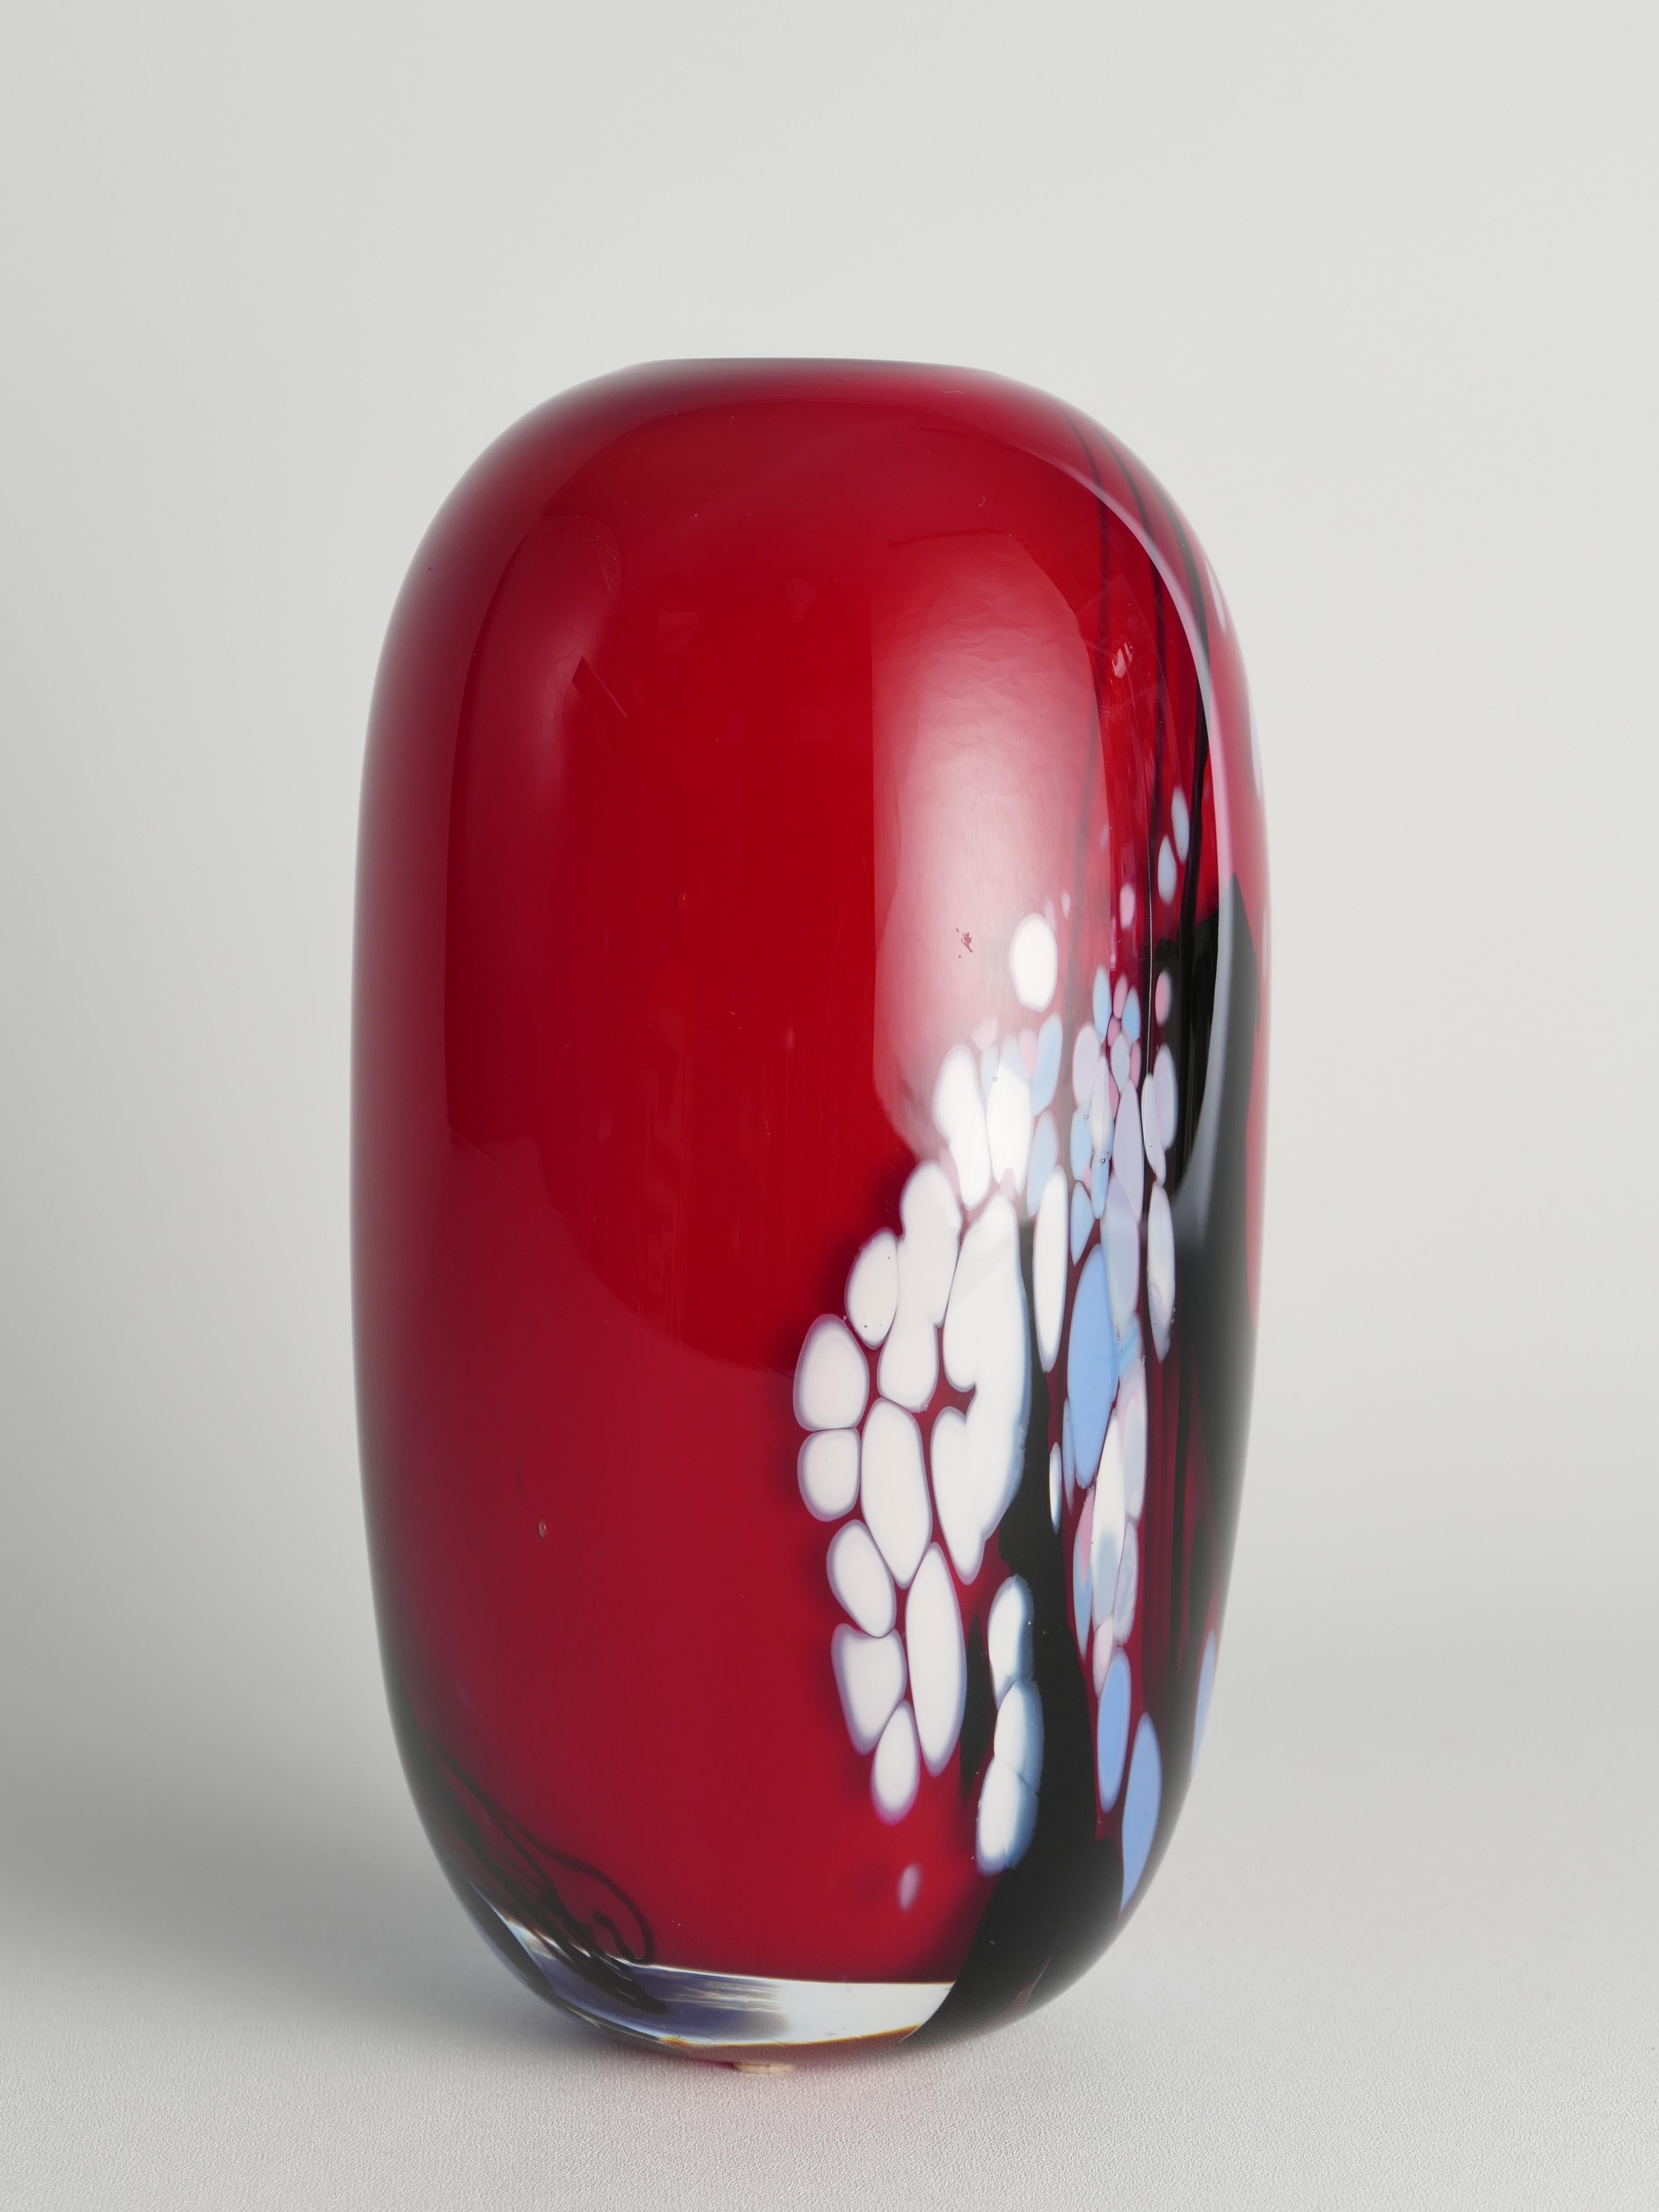 Hand-Crafted Unique Cherry Red Art Glass Vase by Mikael Axenbrant, Sweden 1990 For Sale